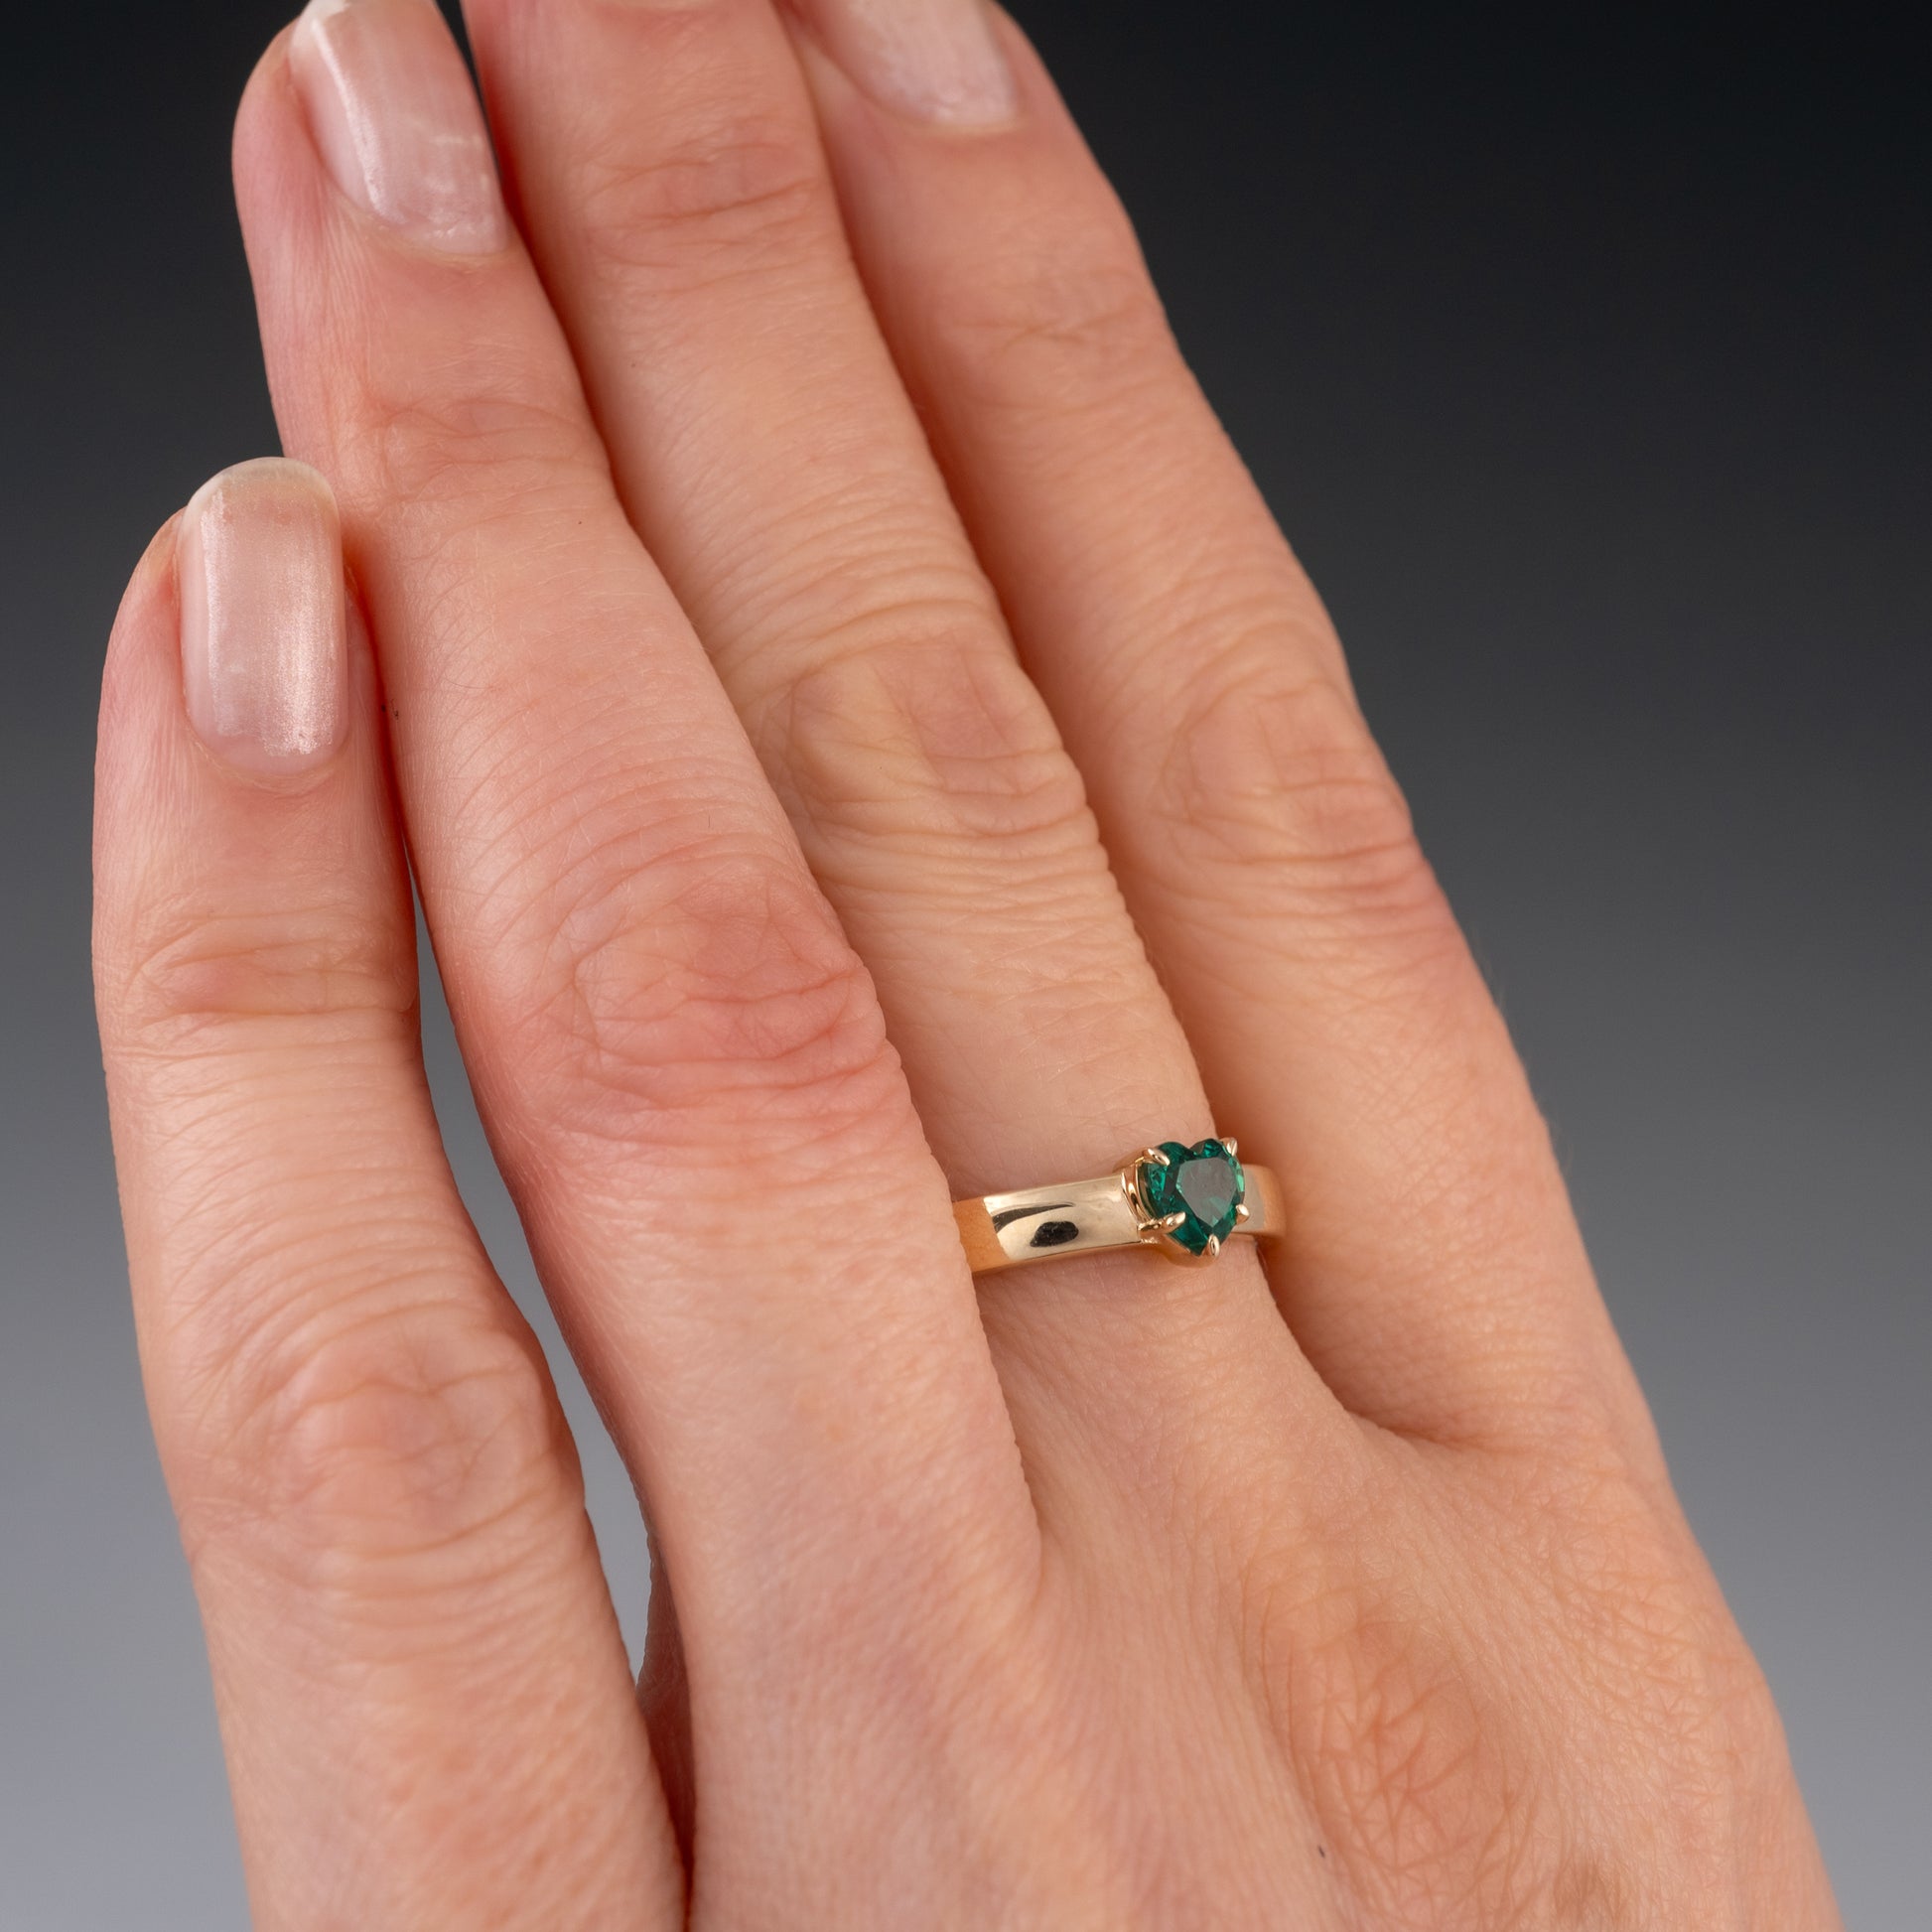 9ct Gold Lab Emerald Heart Ring Full Hallmarks Made To Order - Hunters Fine Jewellery